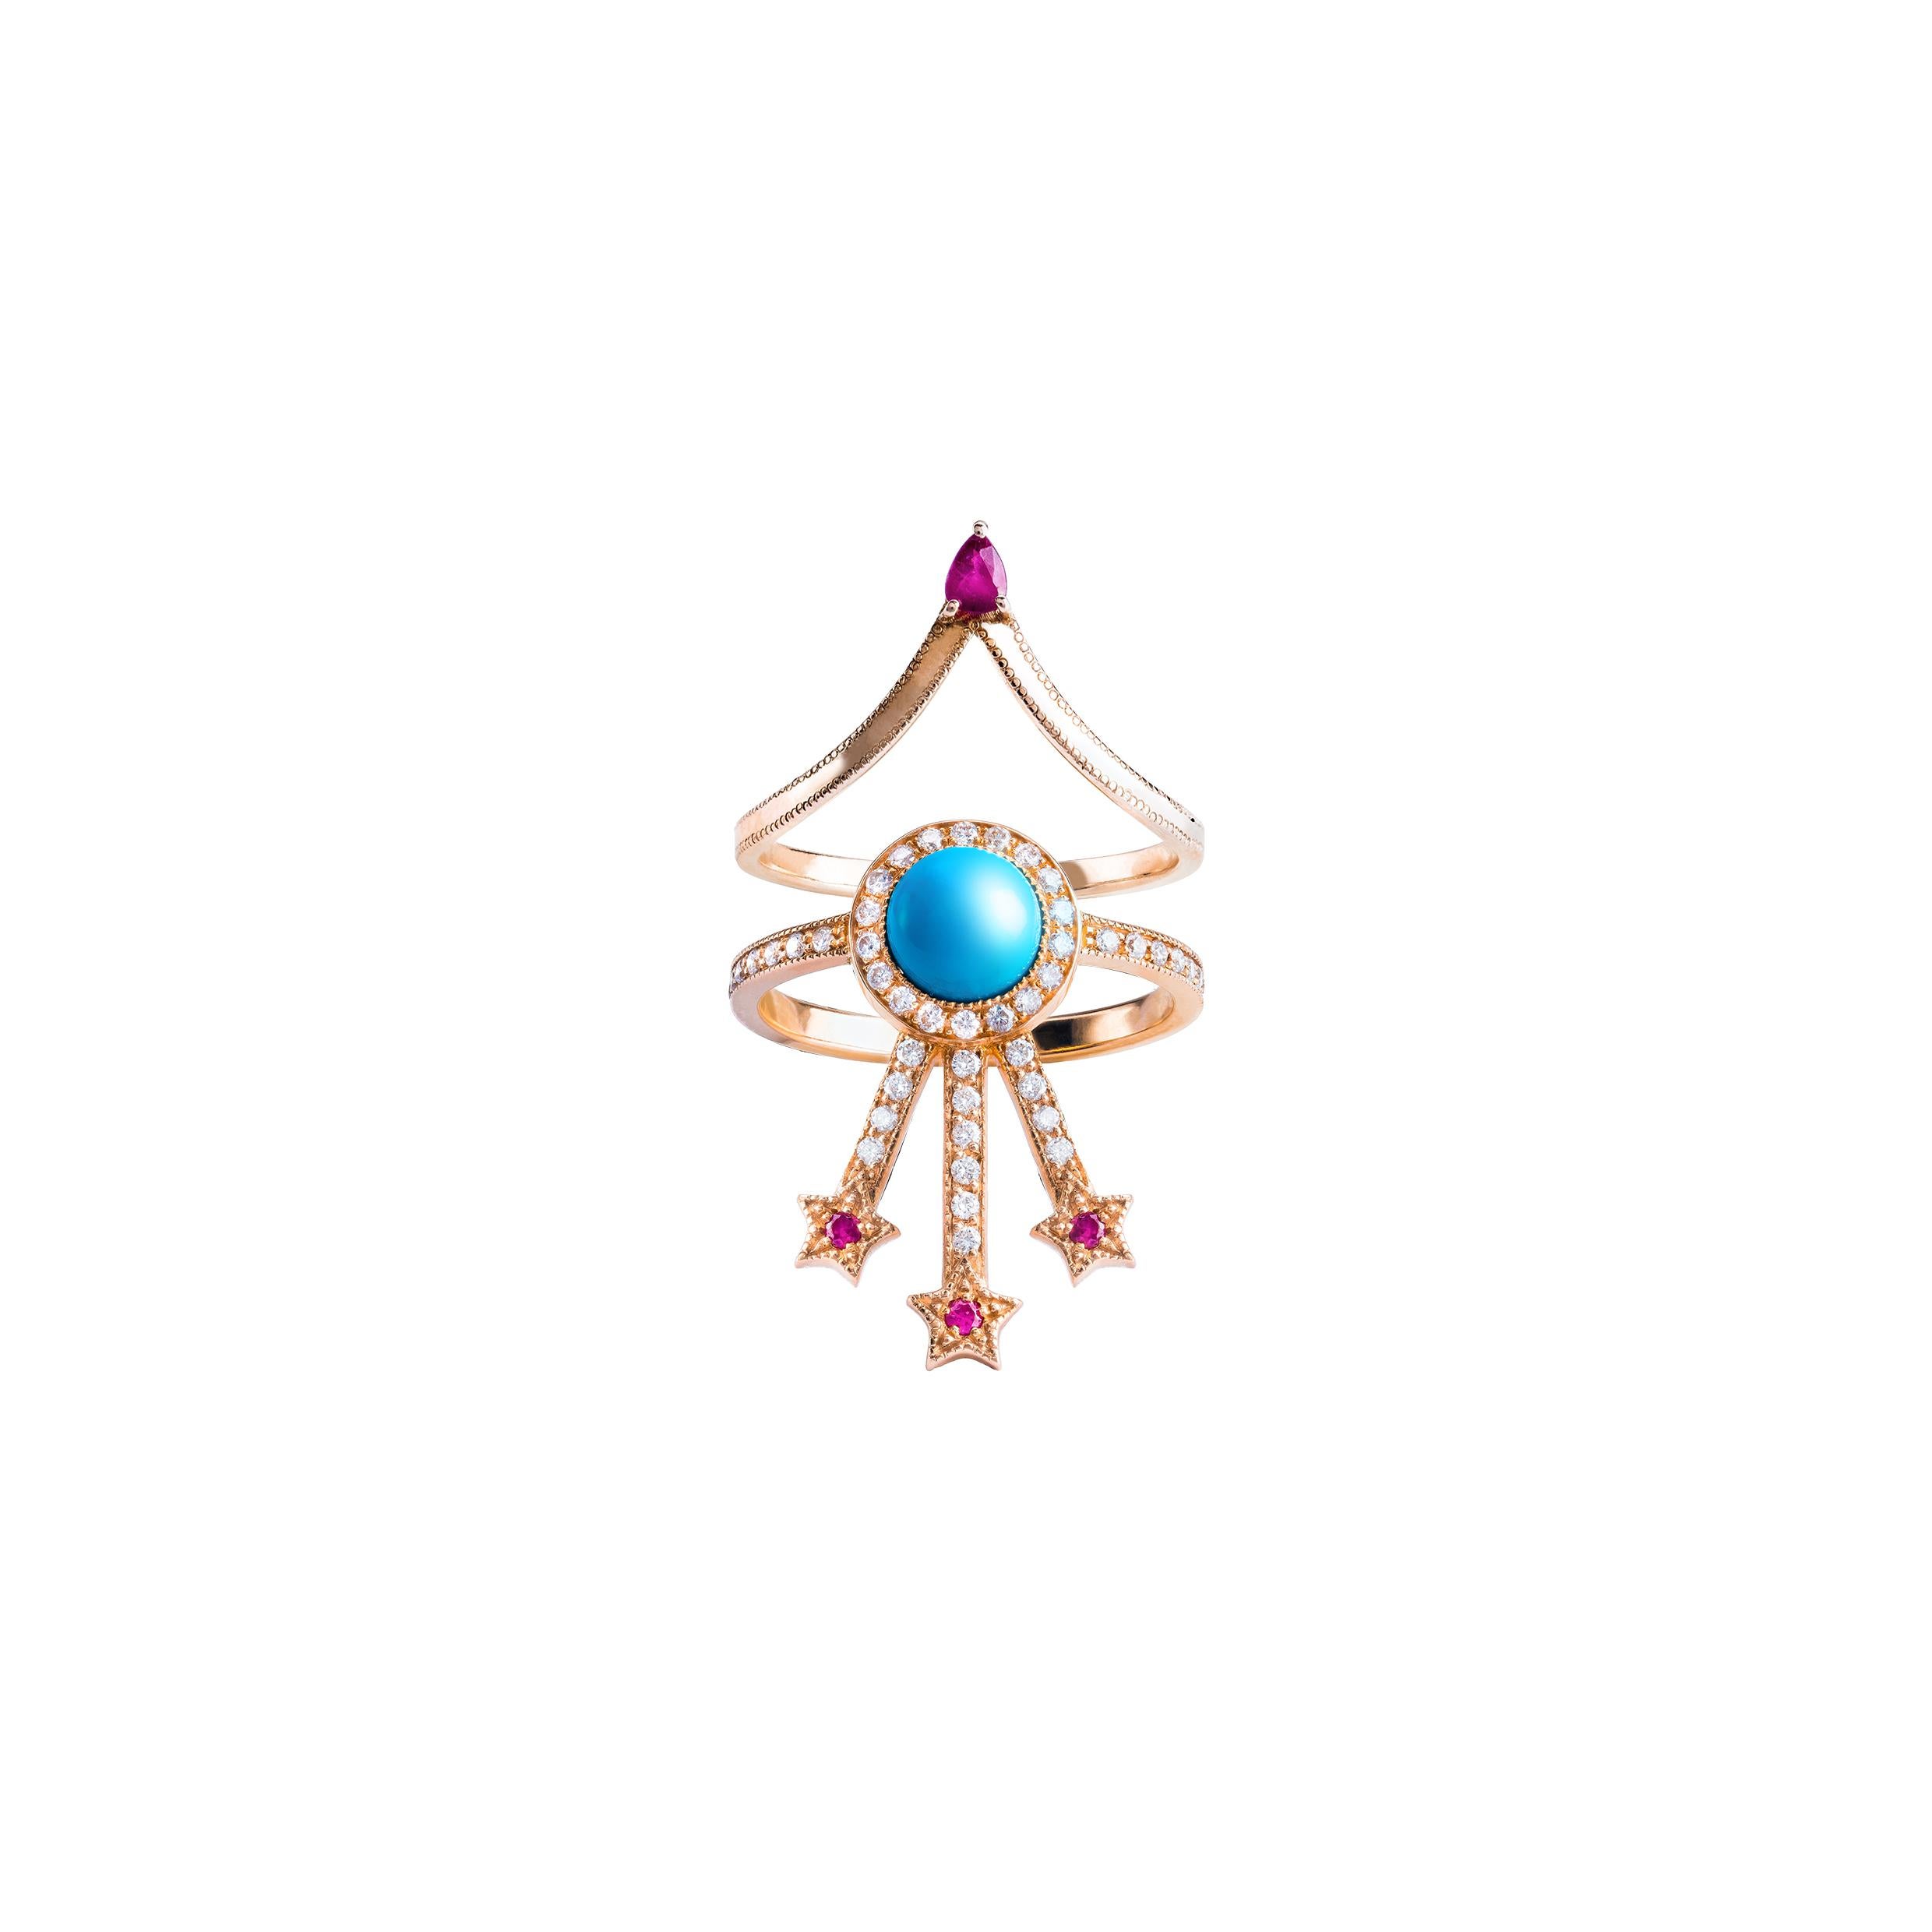 Contemporary Alcylone Ring, Turquoise, Rubies, 18 Karat Rose Gold For Sale